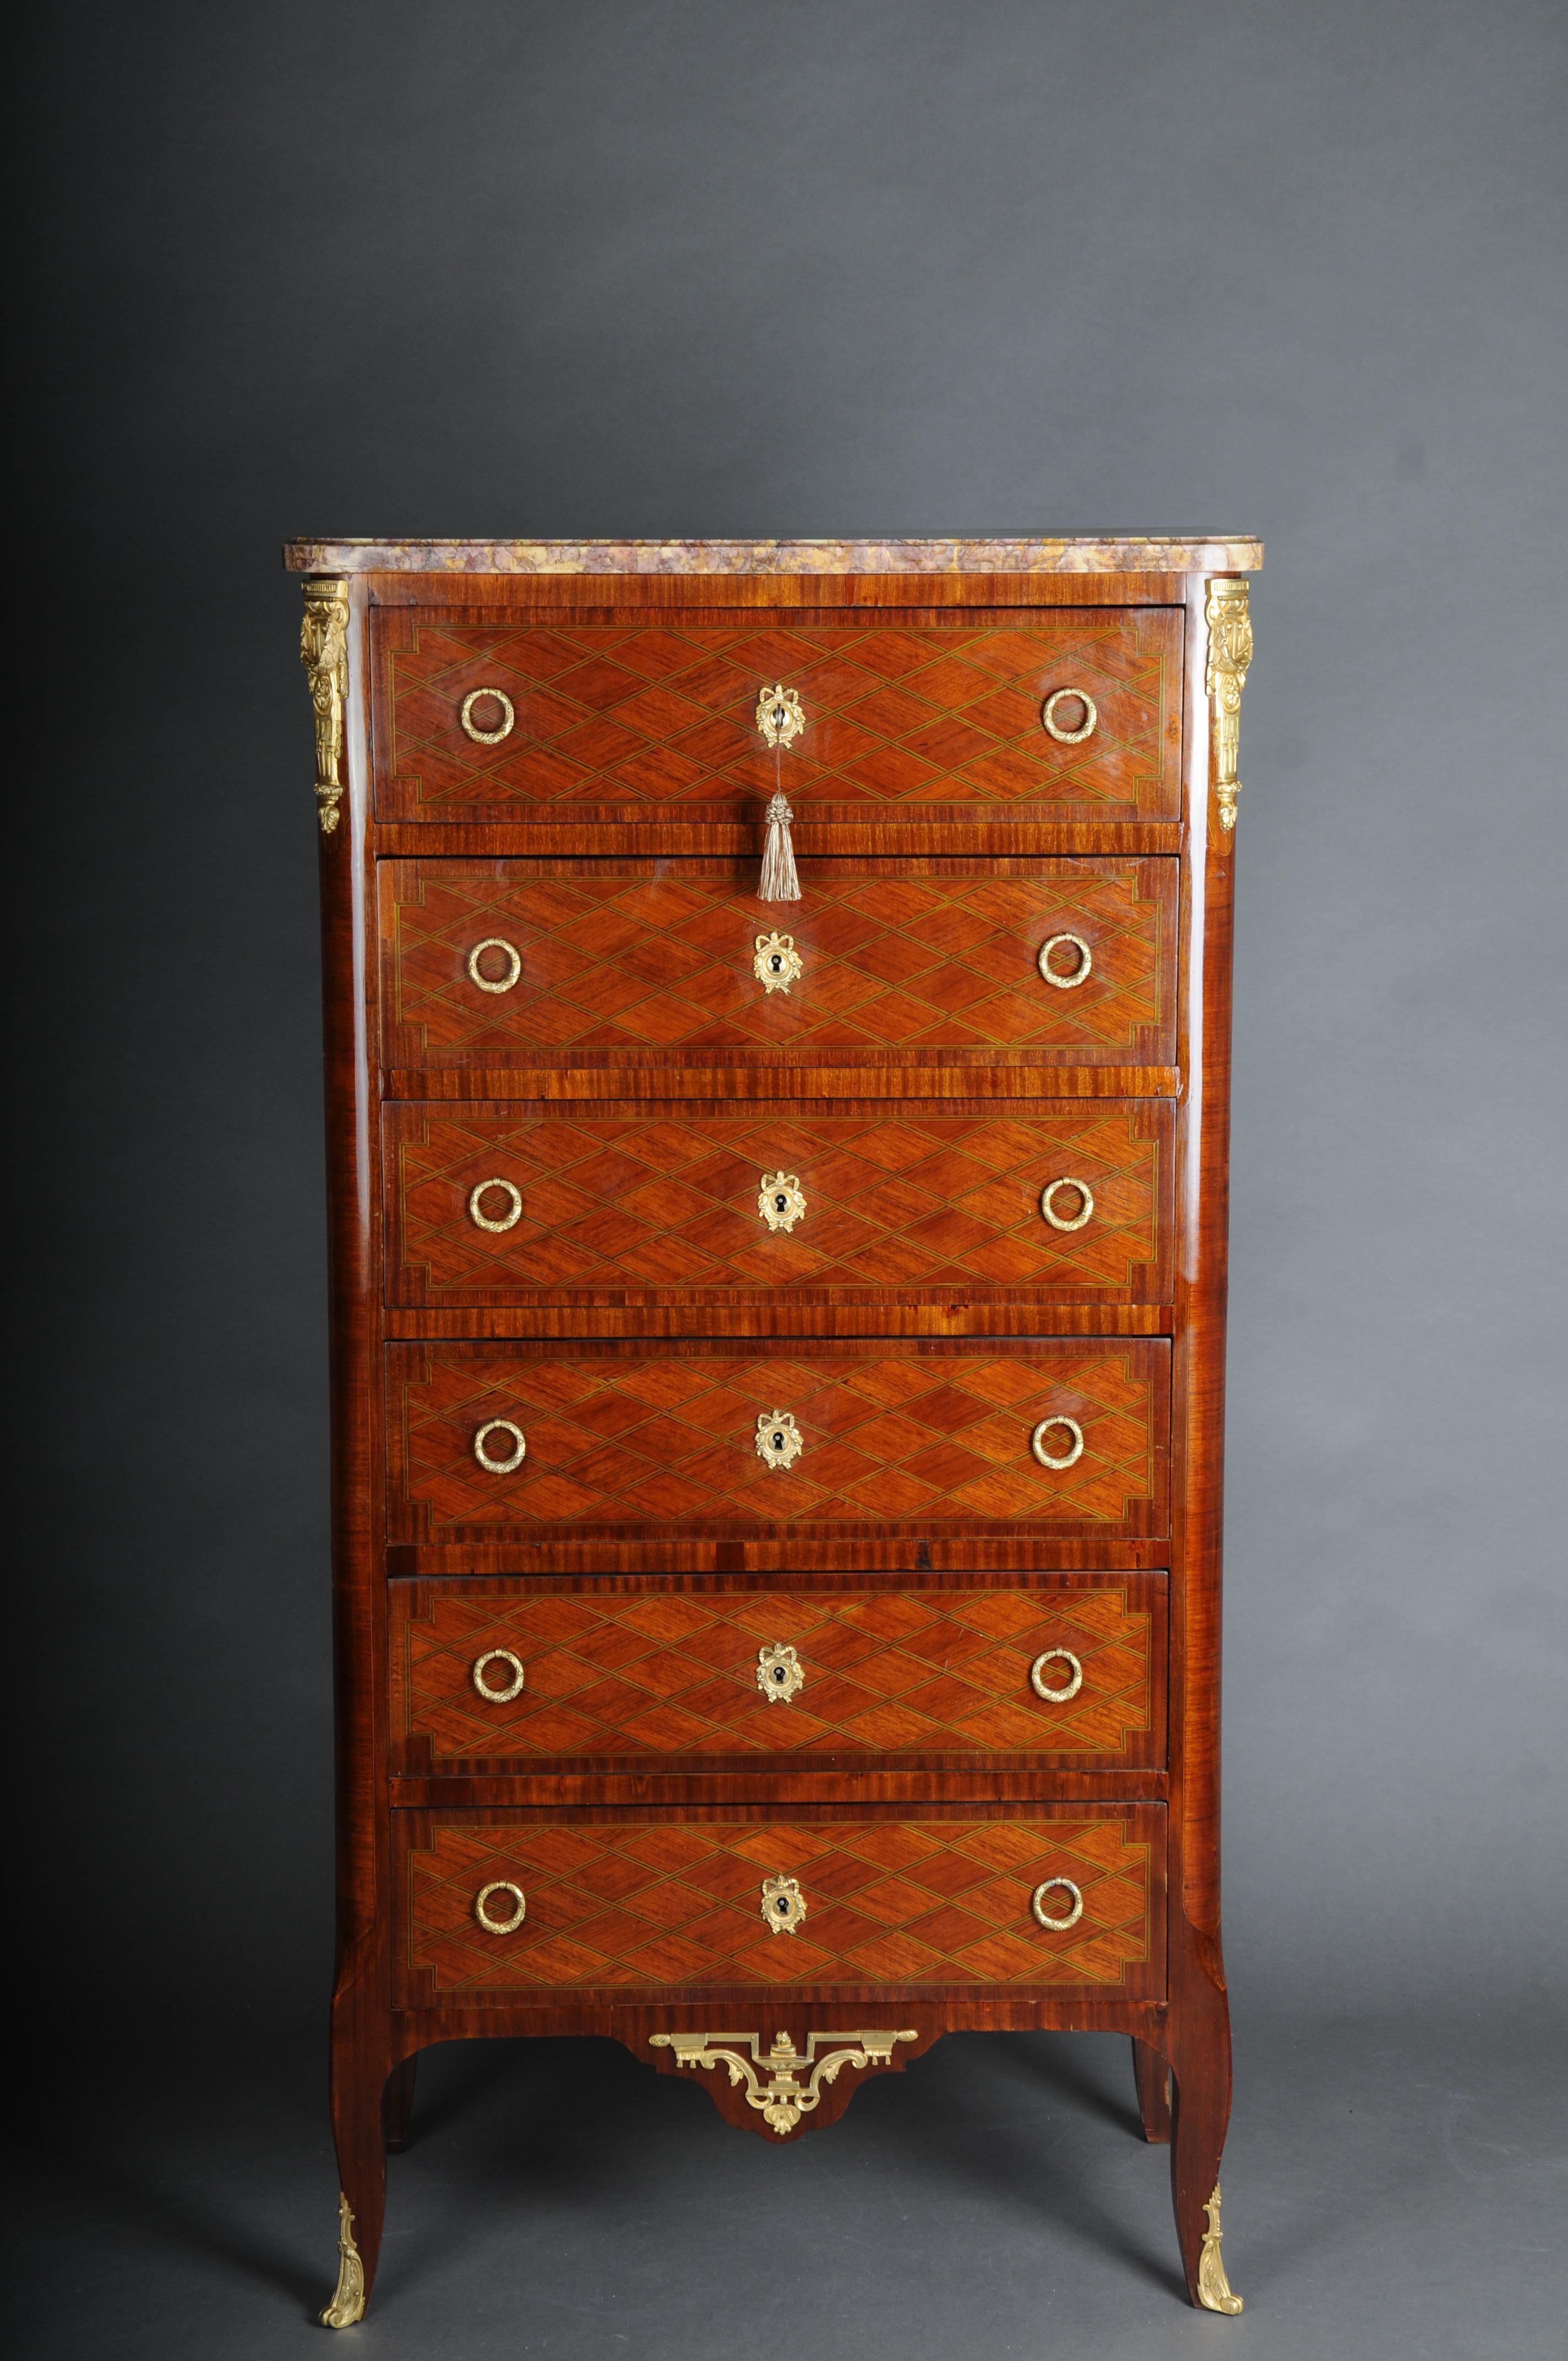 19th Century beautiful high chest of drawers / Chiffoniere in Louis XVI / transition.

Solid oak body with extremely elaborate marquetry veneer work on three sides. The chest of drawers is a so-called men's chest of drawers/tall chest of drawers